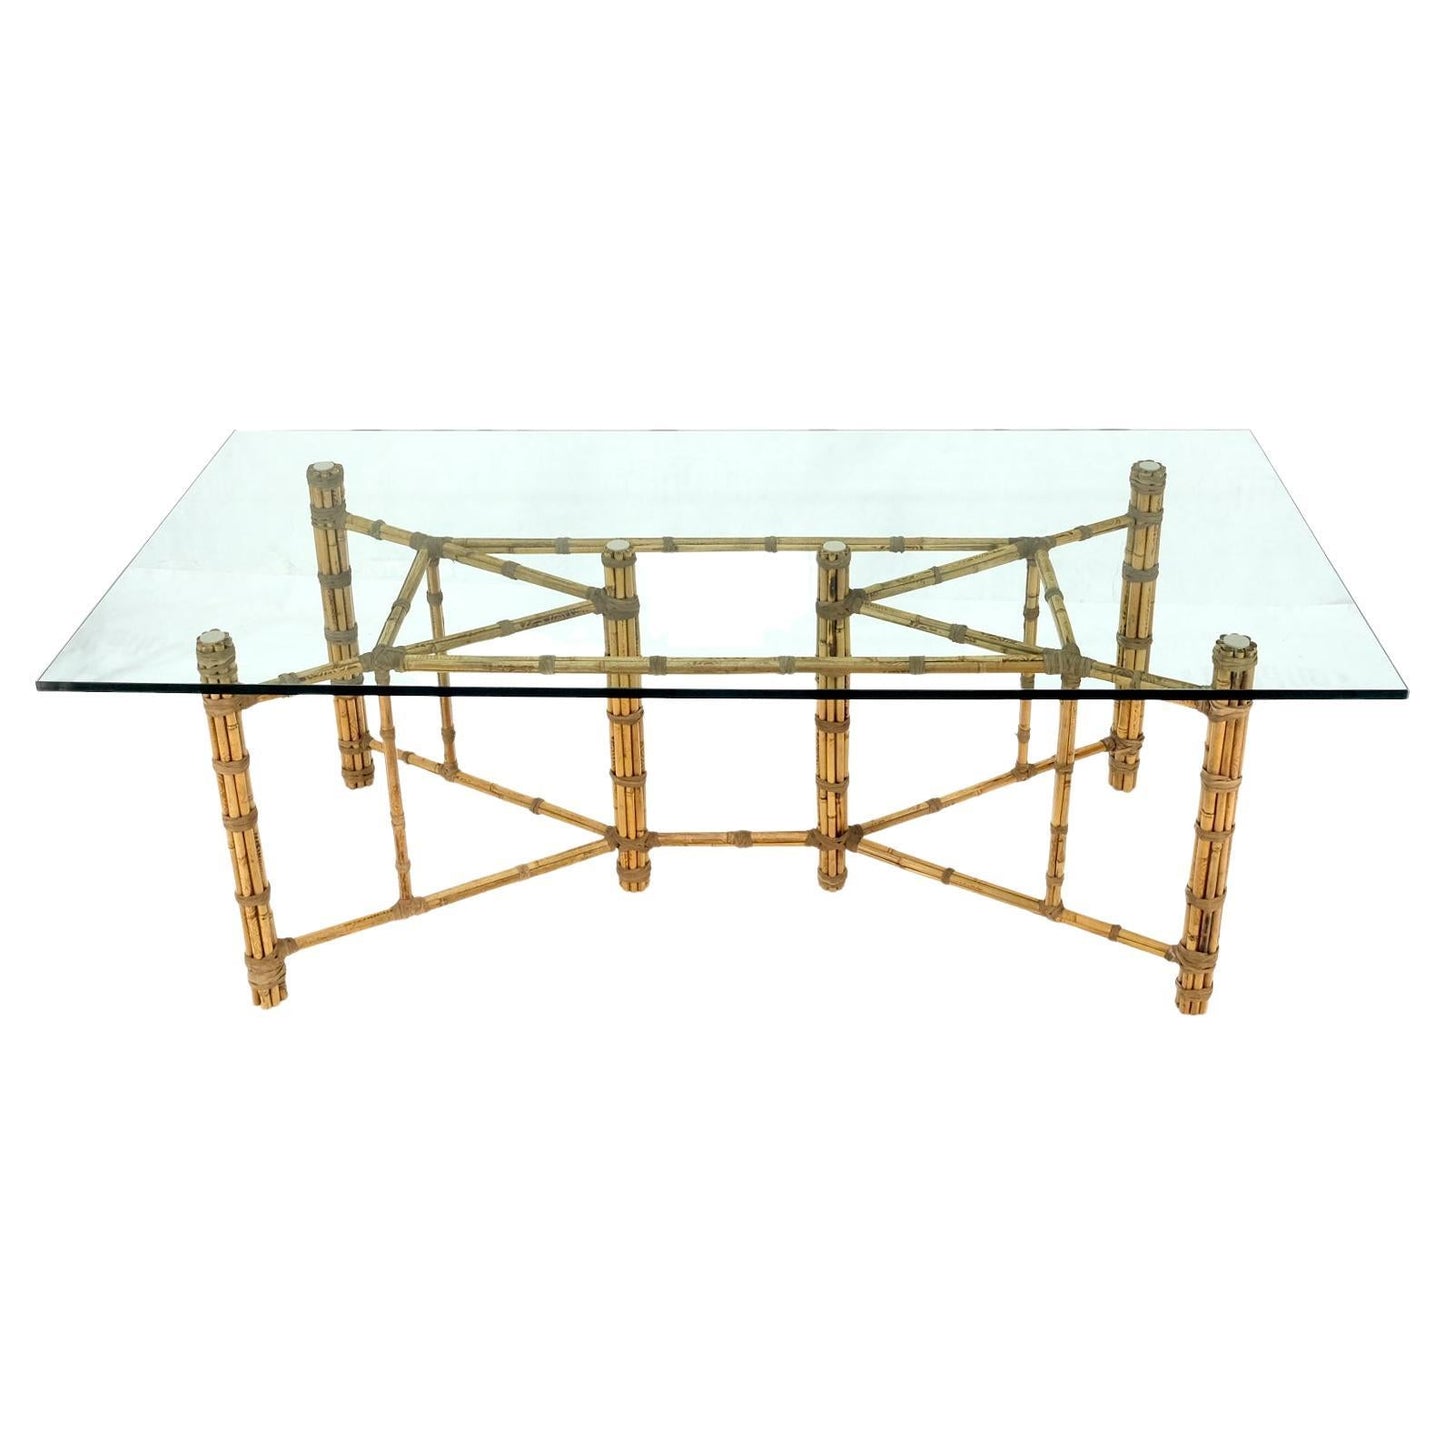 Large Glass Top Bamboo & Leather Straps Frame Dining Conference Table by McGuire